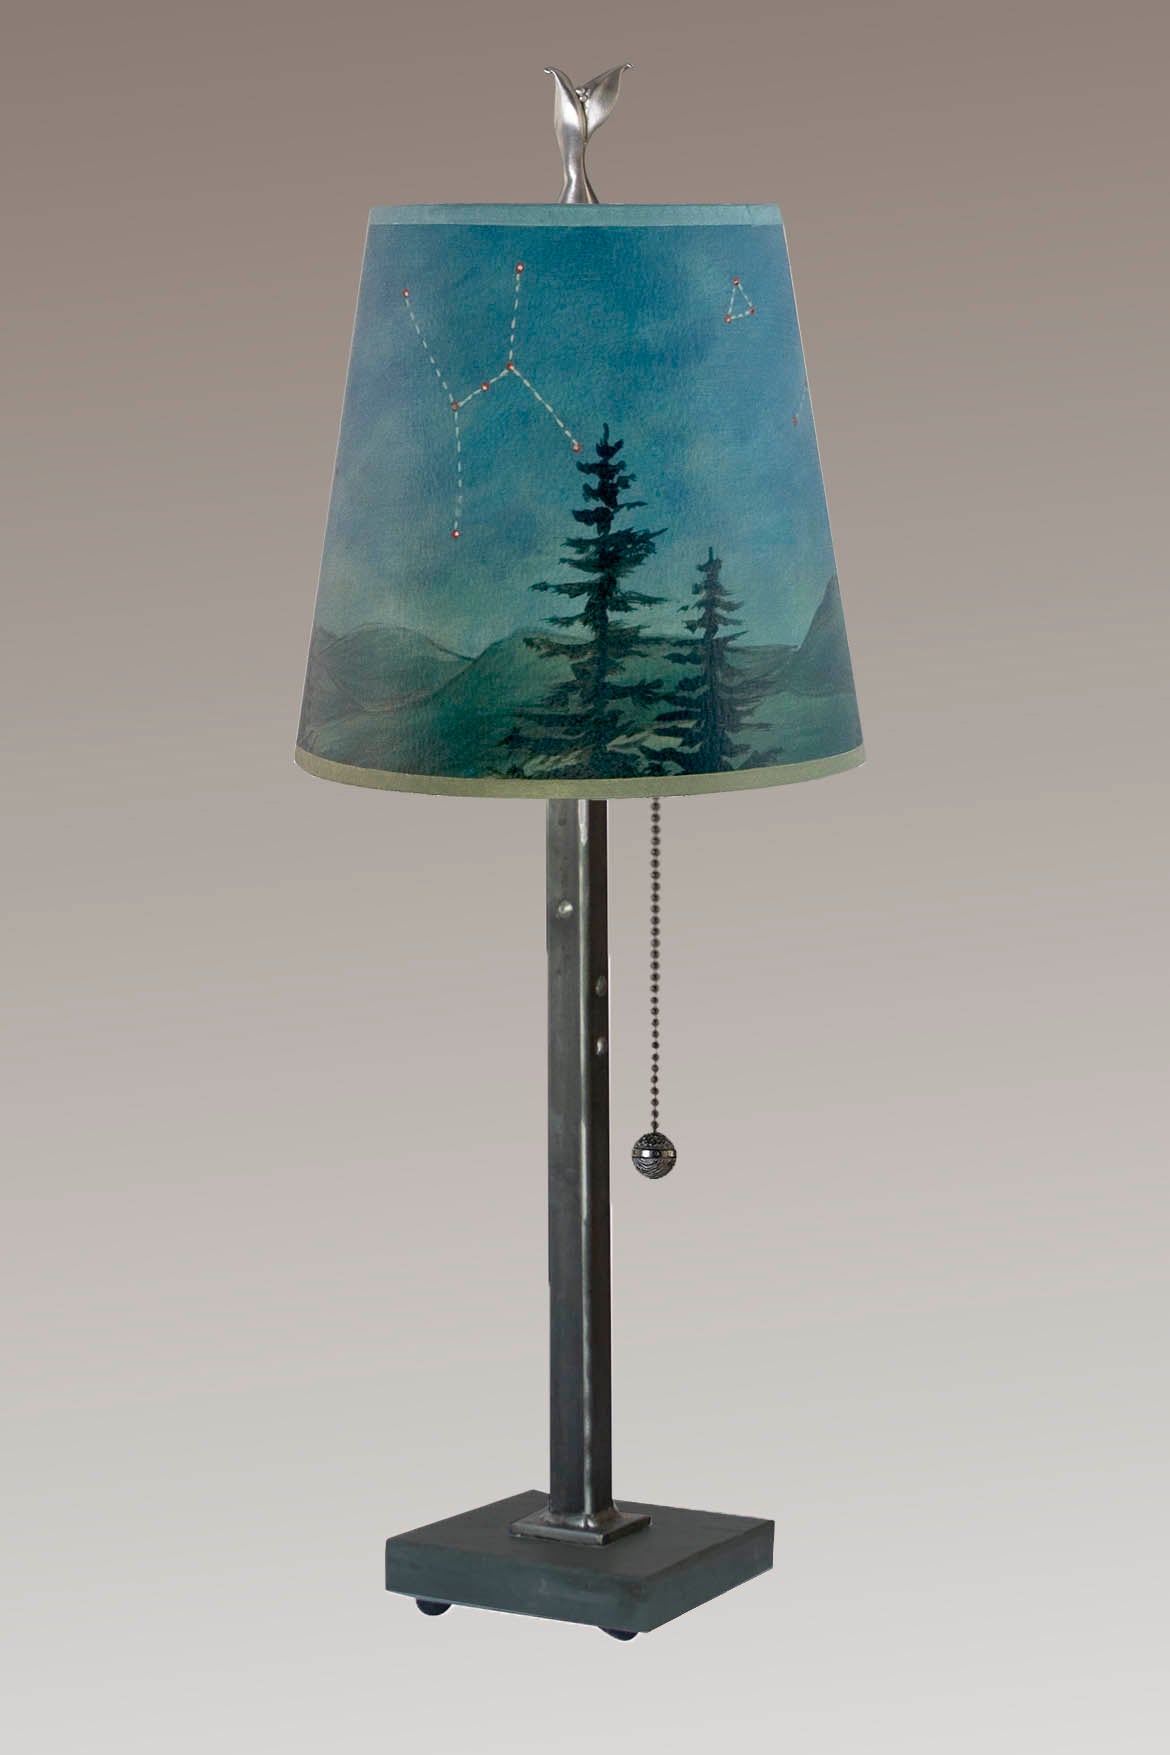 Janna Ugone & Co Table Lamp Steel Table Lamp with Small Drum Shade in Midnight